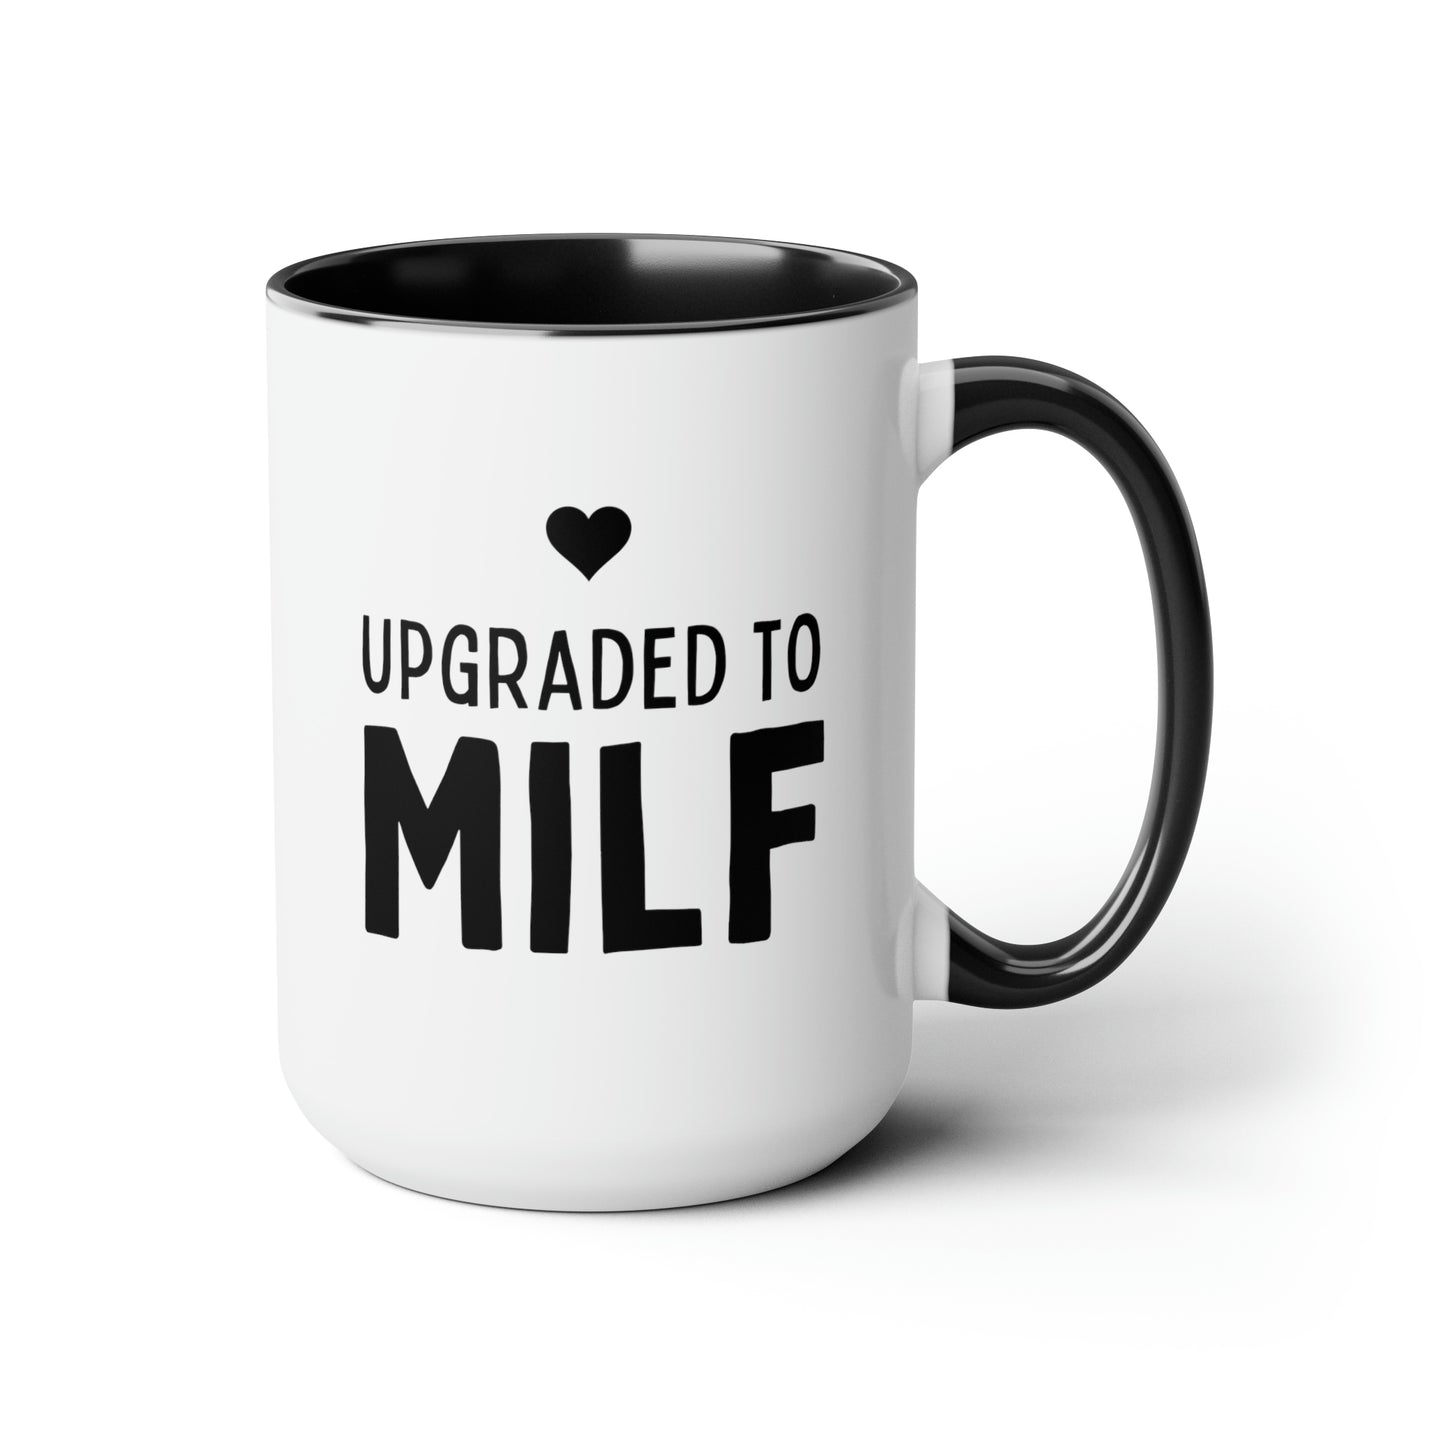 Upgraded to MILF 15oz white with black accent Funny large Coffee Mug gift for mothers day expecting mom new mom pregnancy announcement baby shower waveywares wavey wares wavywares wavy wares